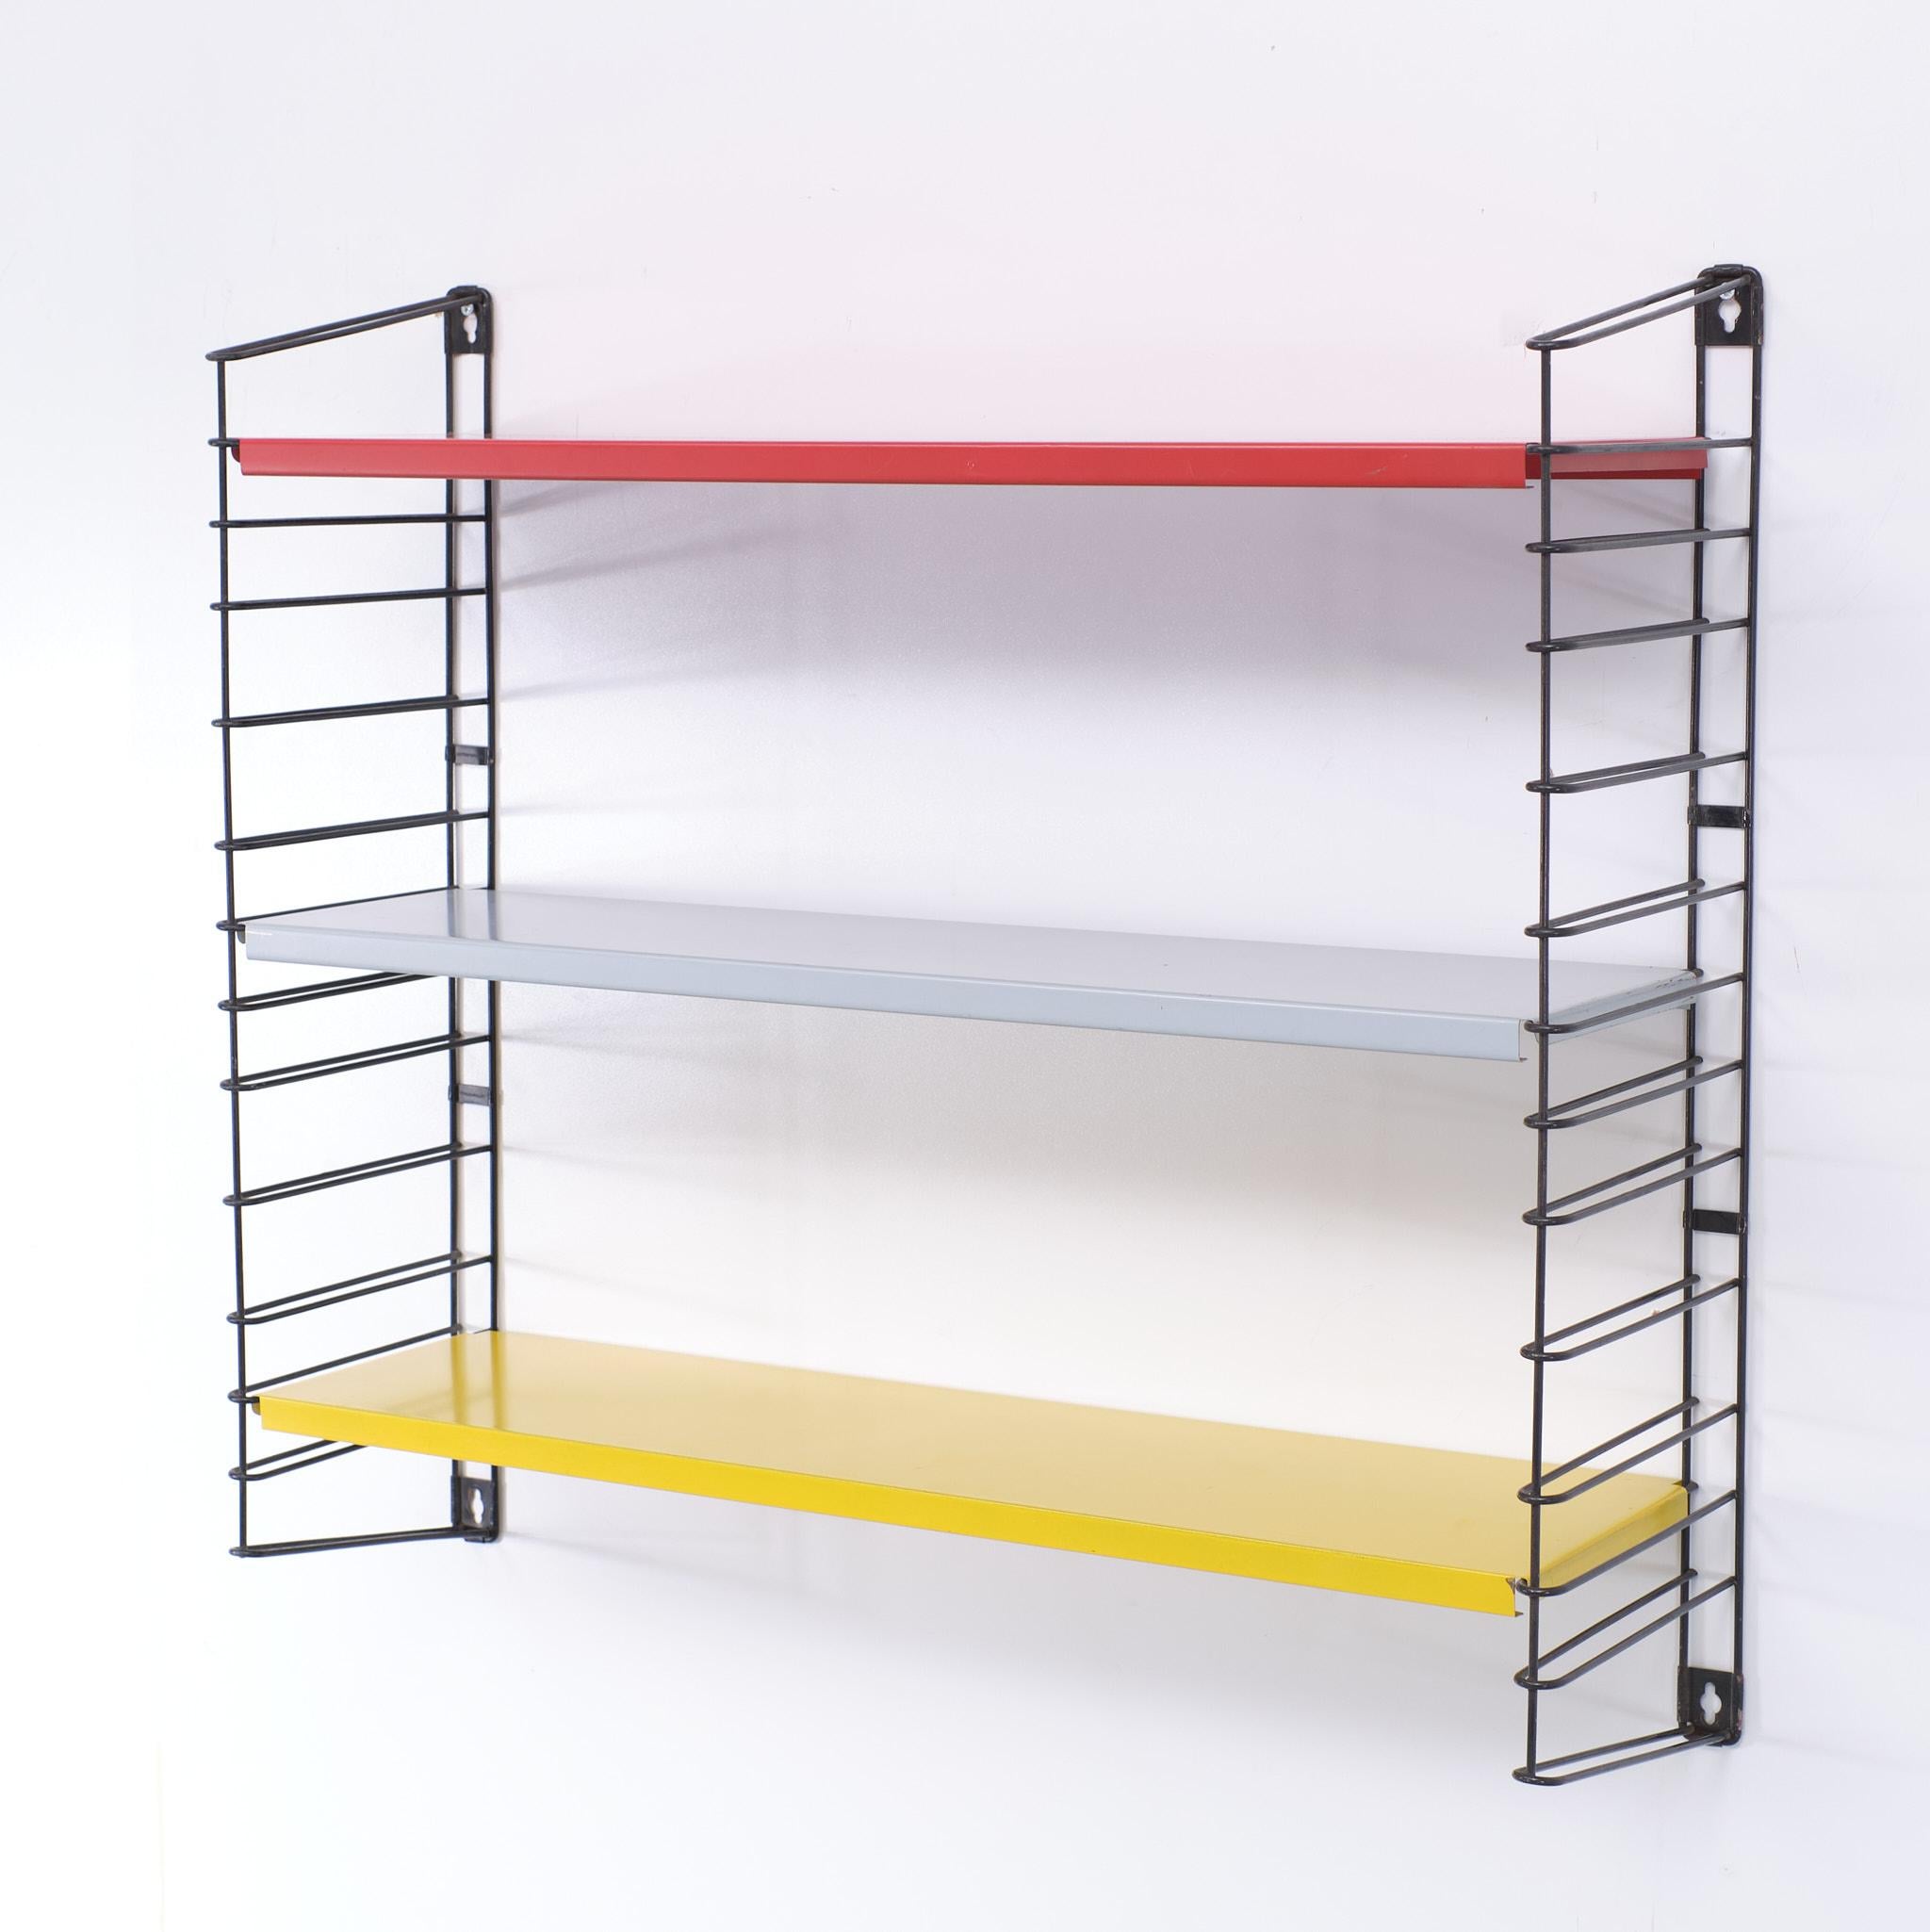 A real design classic this Tomado wall rack, Two ladders with 3 shelves, In the colors red yellow and grey 
very good condition several sets available.